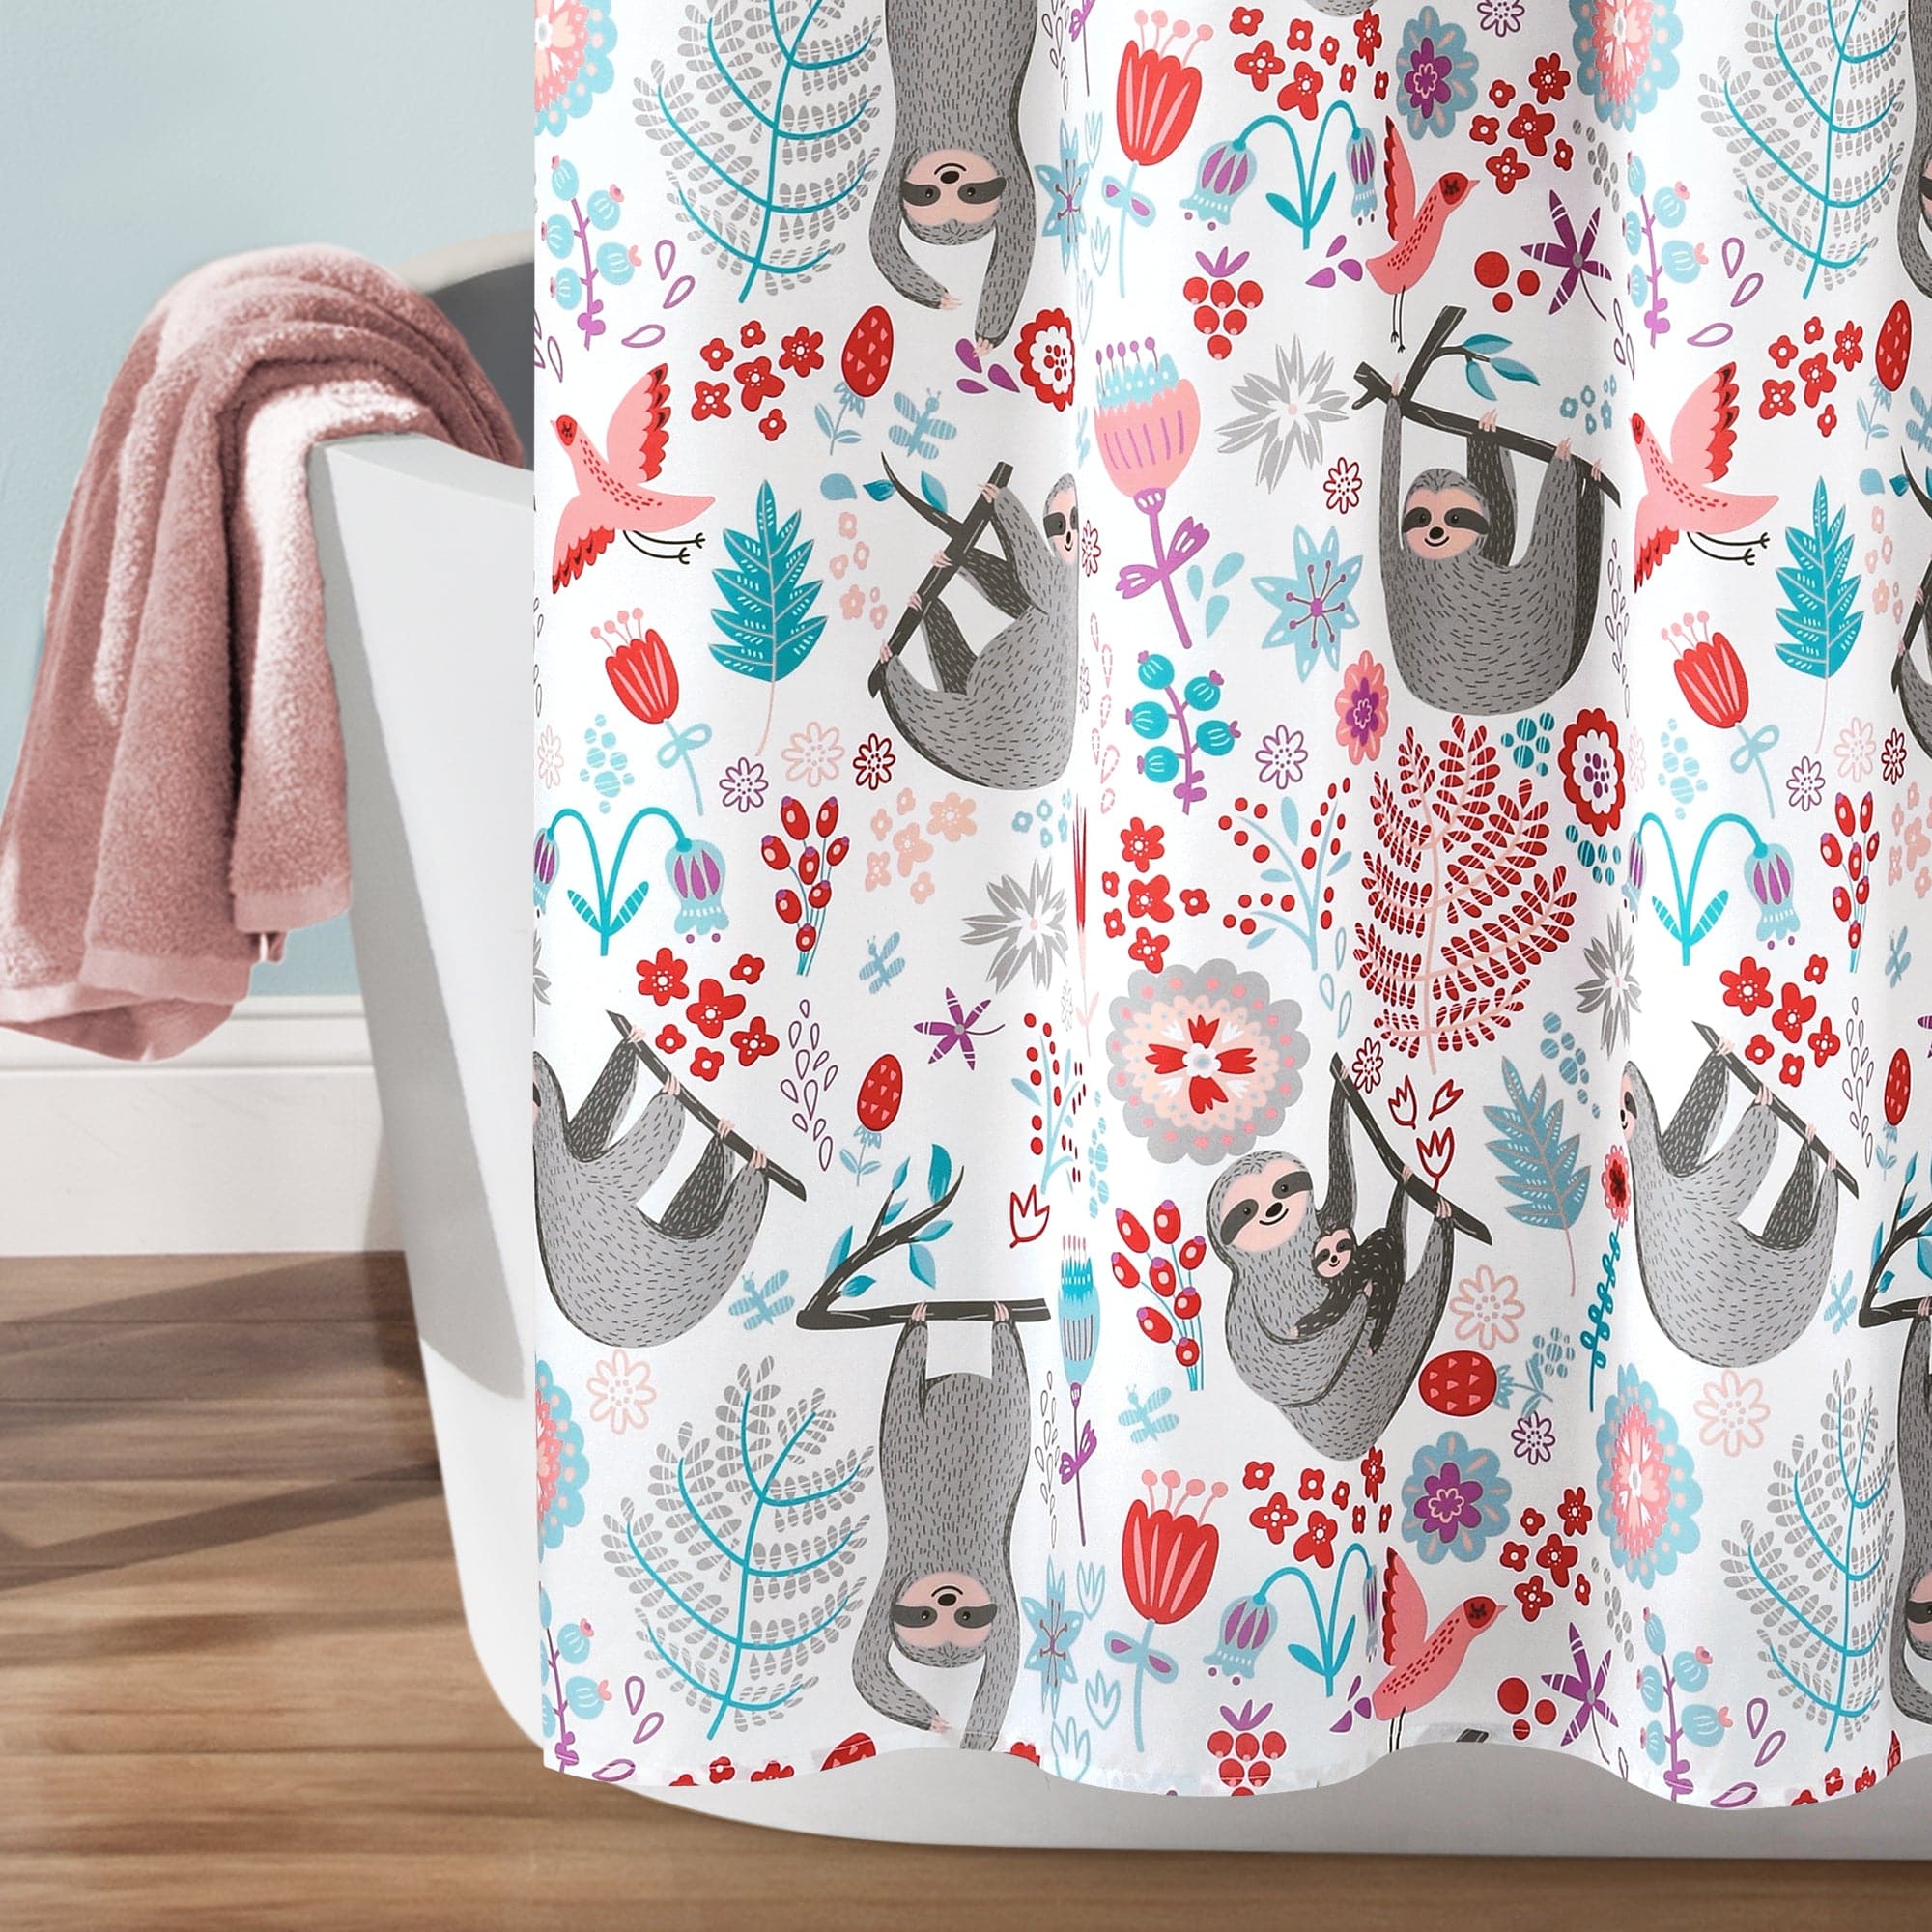 Singingin Shower Curtain Set with Bathroom Rugs and Mats Sloth